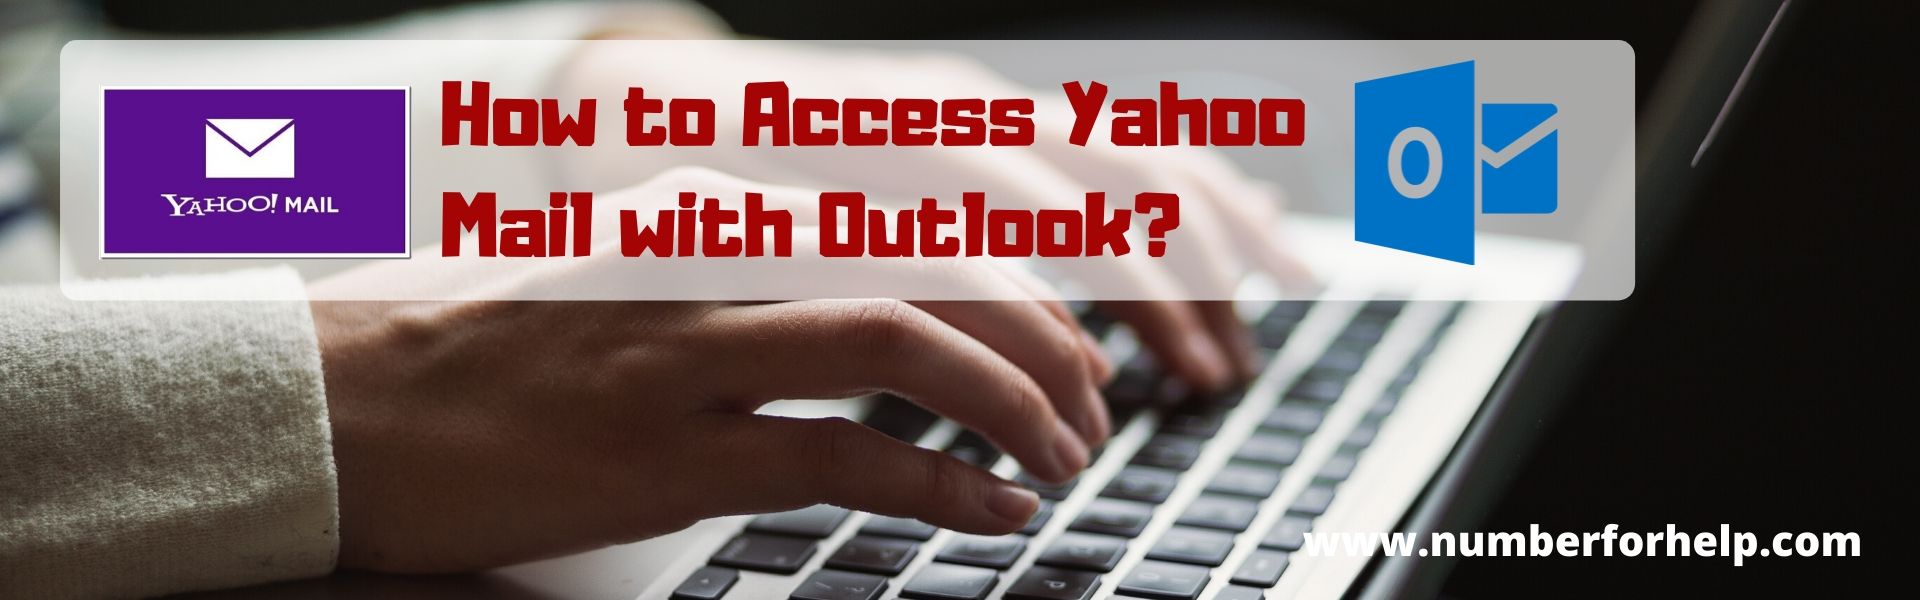 2020-05-27-05-17-50How to Access Yahoo Mail with Outlook